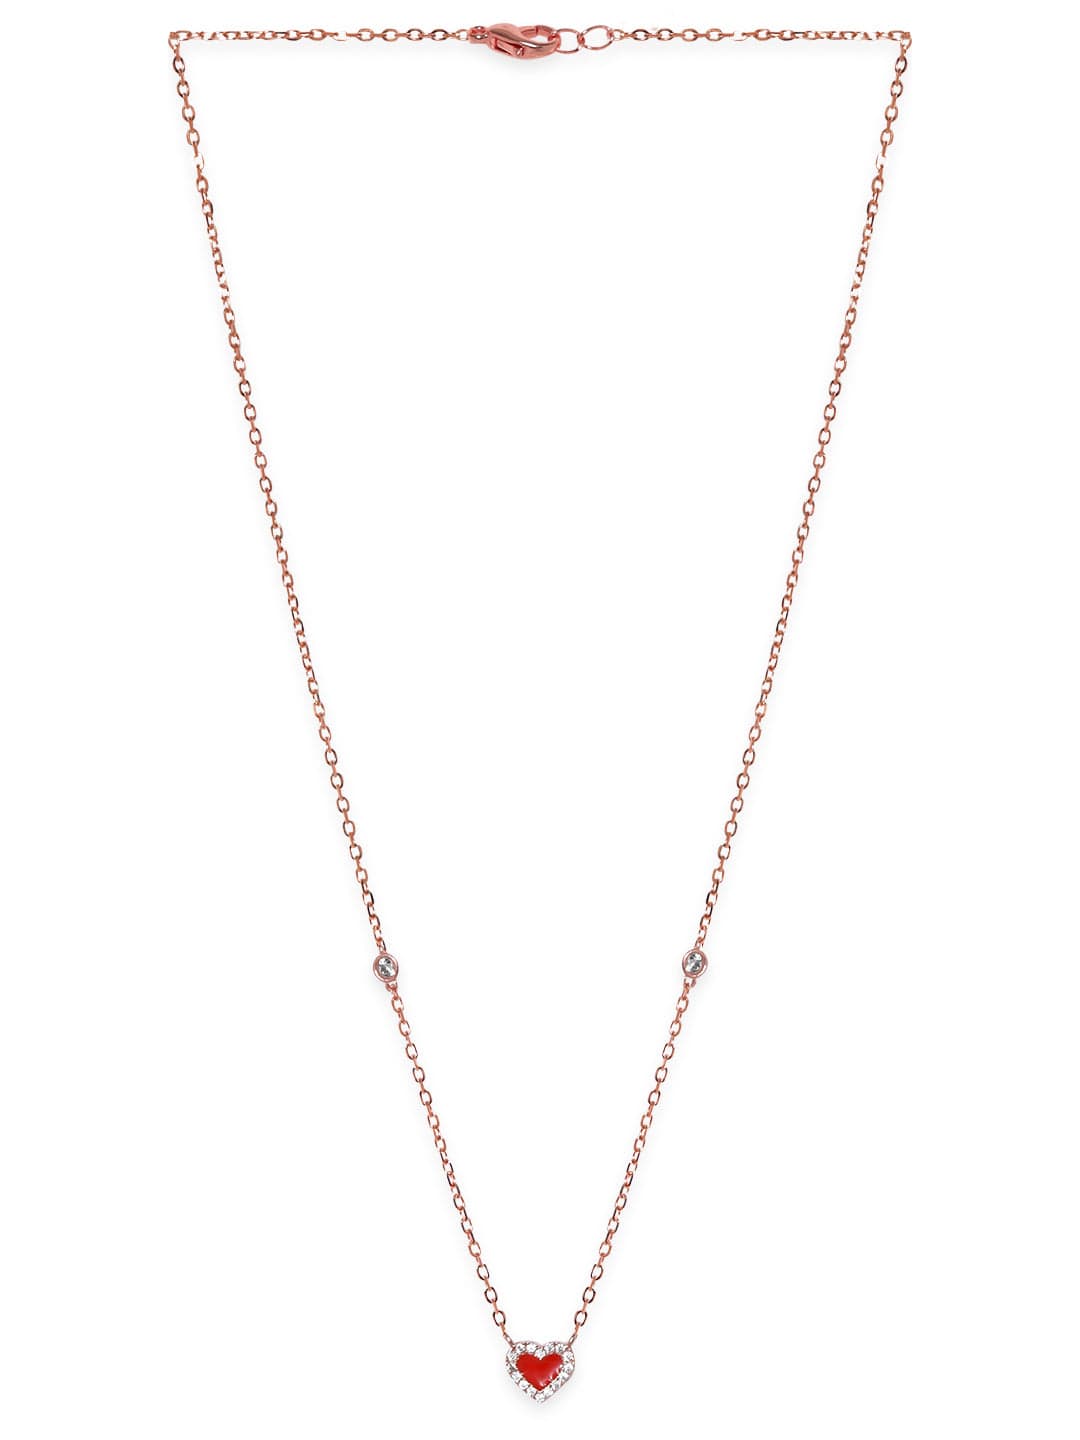 Rubans 925 Silver 18K Rose Gold Plated Red Heart Studded Charm Necklace Necklaces, Necklace Sets, Chains &amp; Mangalsutra